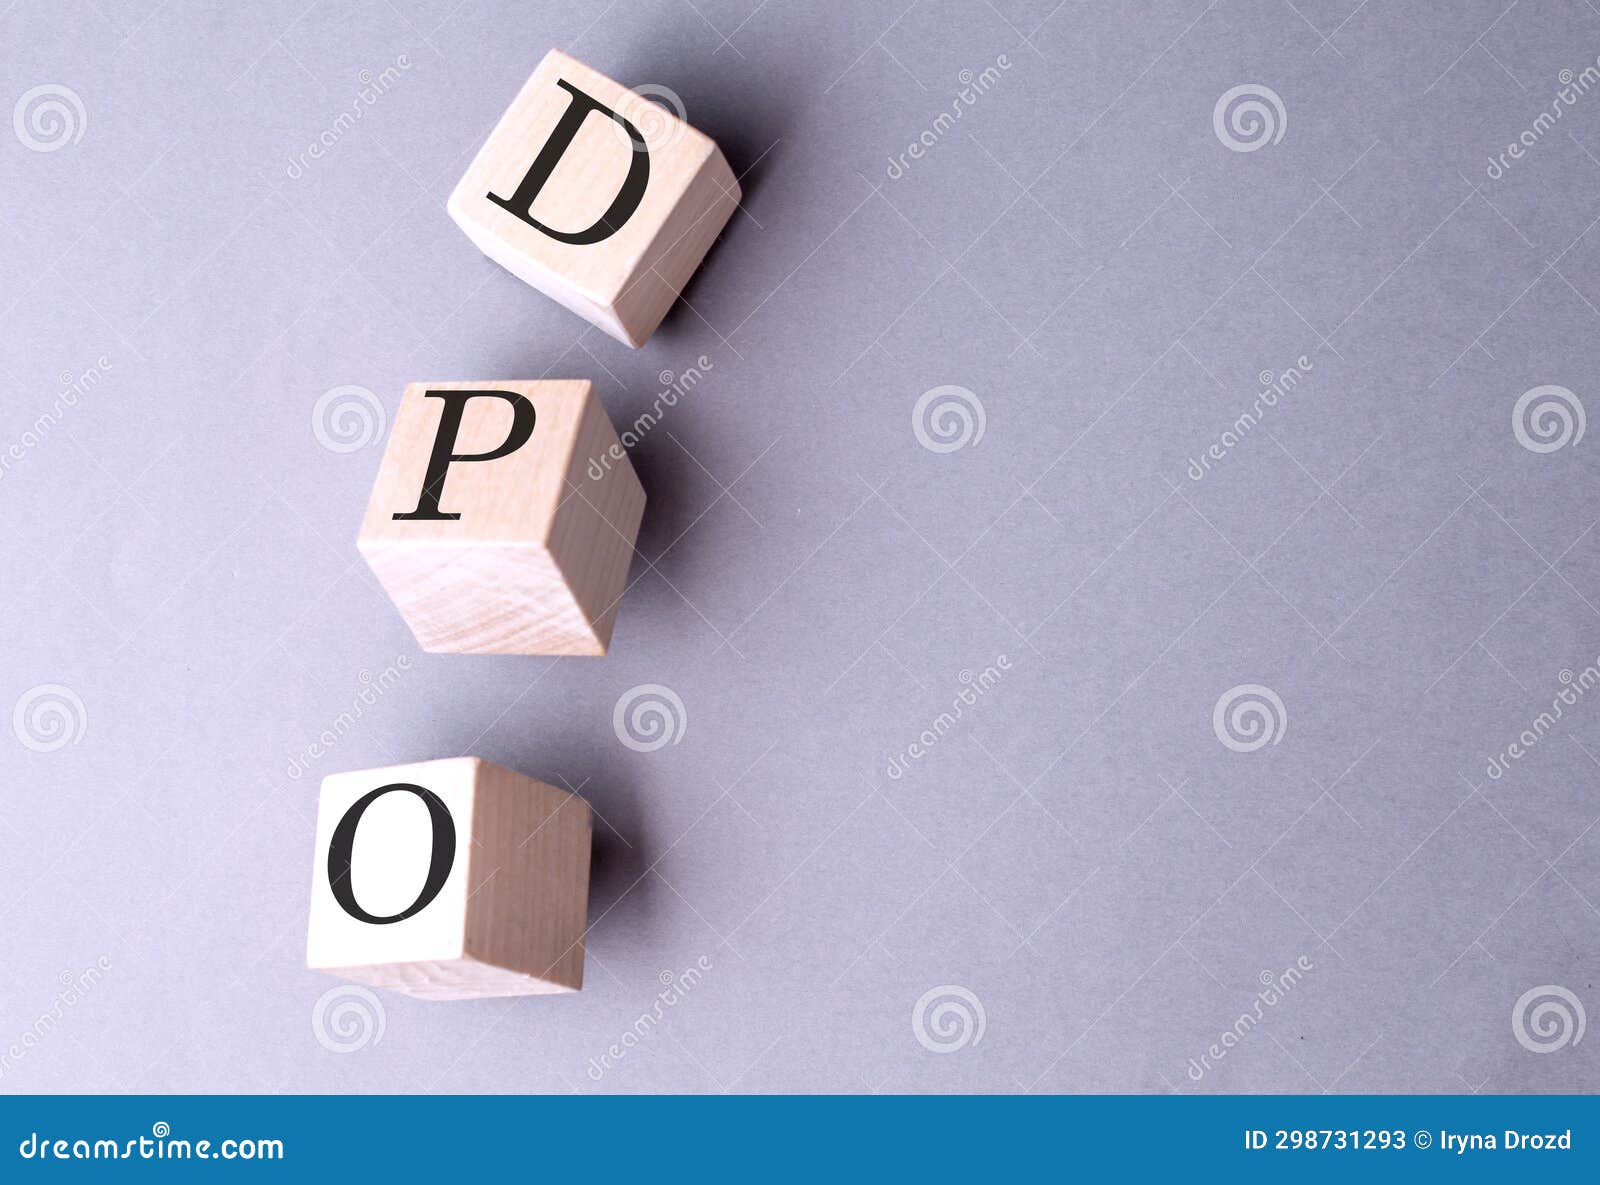 word dpo on wooden block on the grey background